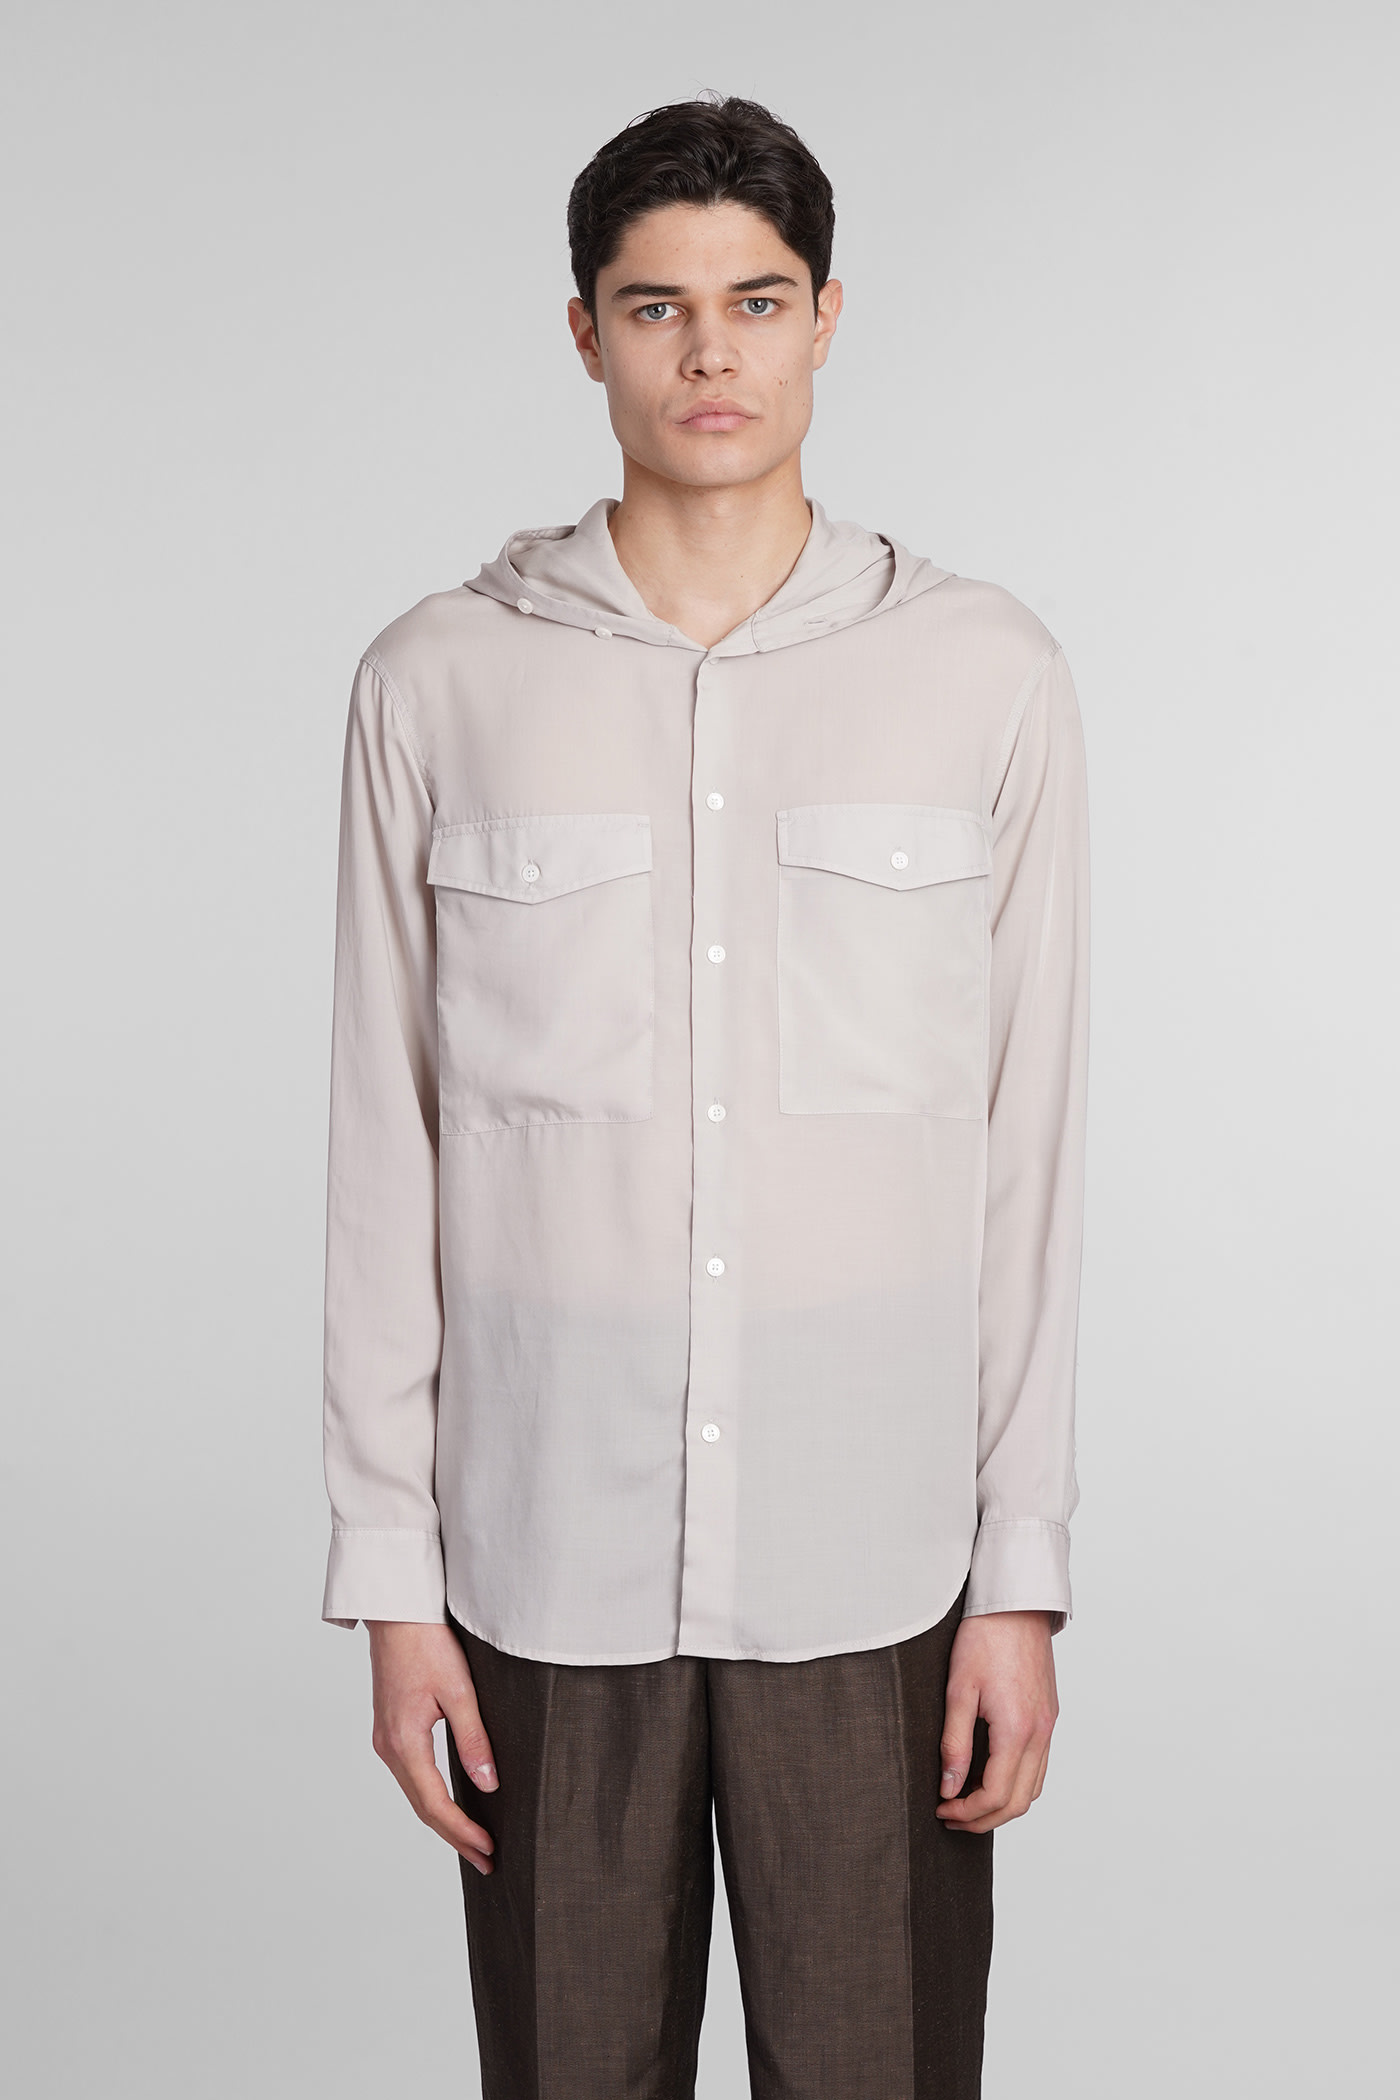 Emporio Armani Shirt In Grey Wool And Polyester